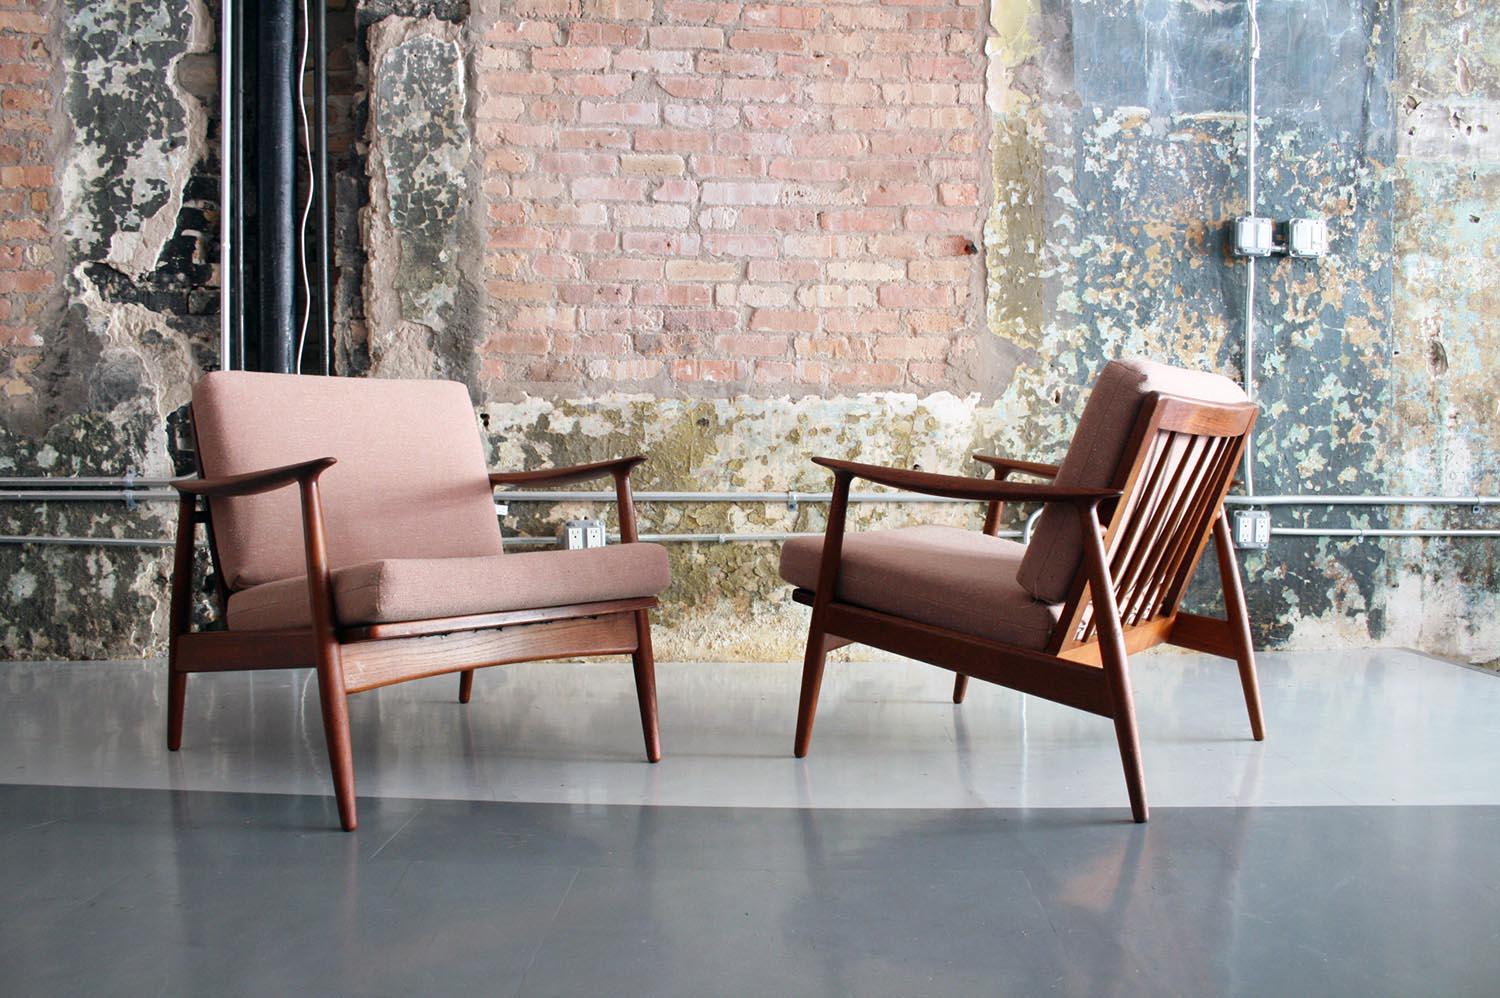 A fantastic pair of matching teak framed lounge chairs by Moreddi Denmark. Upholstered in soft pink colored bucle fabric.